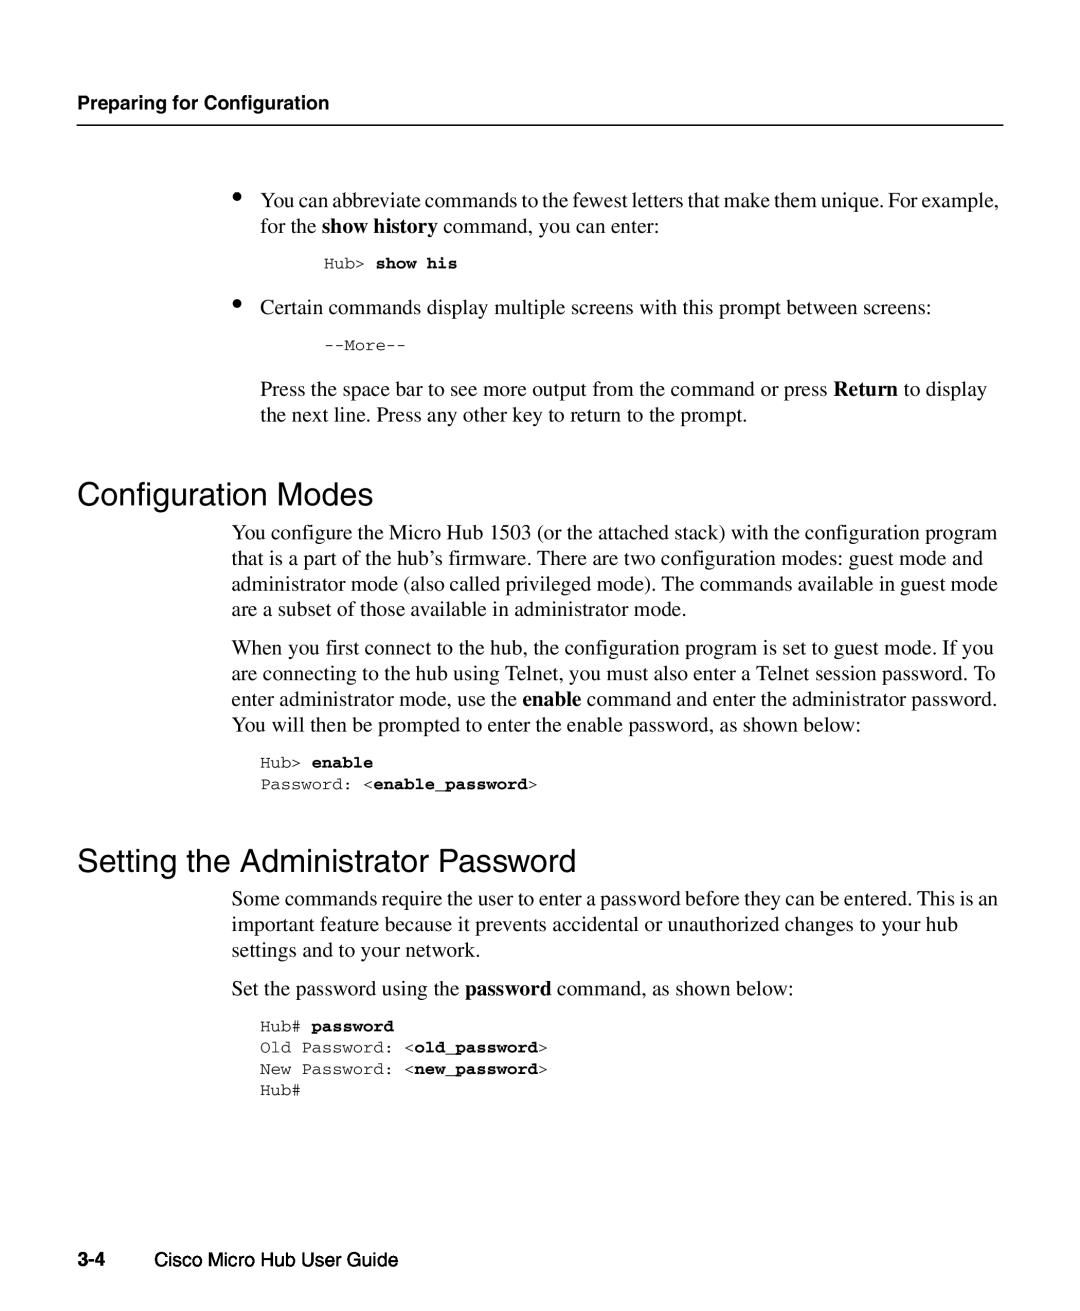 Cisco Systems 1503 manual Configuration Modes, Setting the Administrator Password 